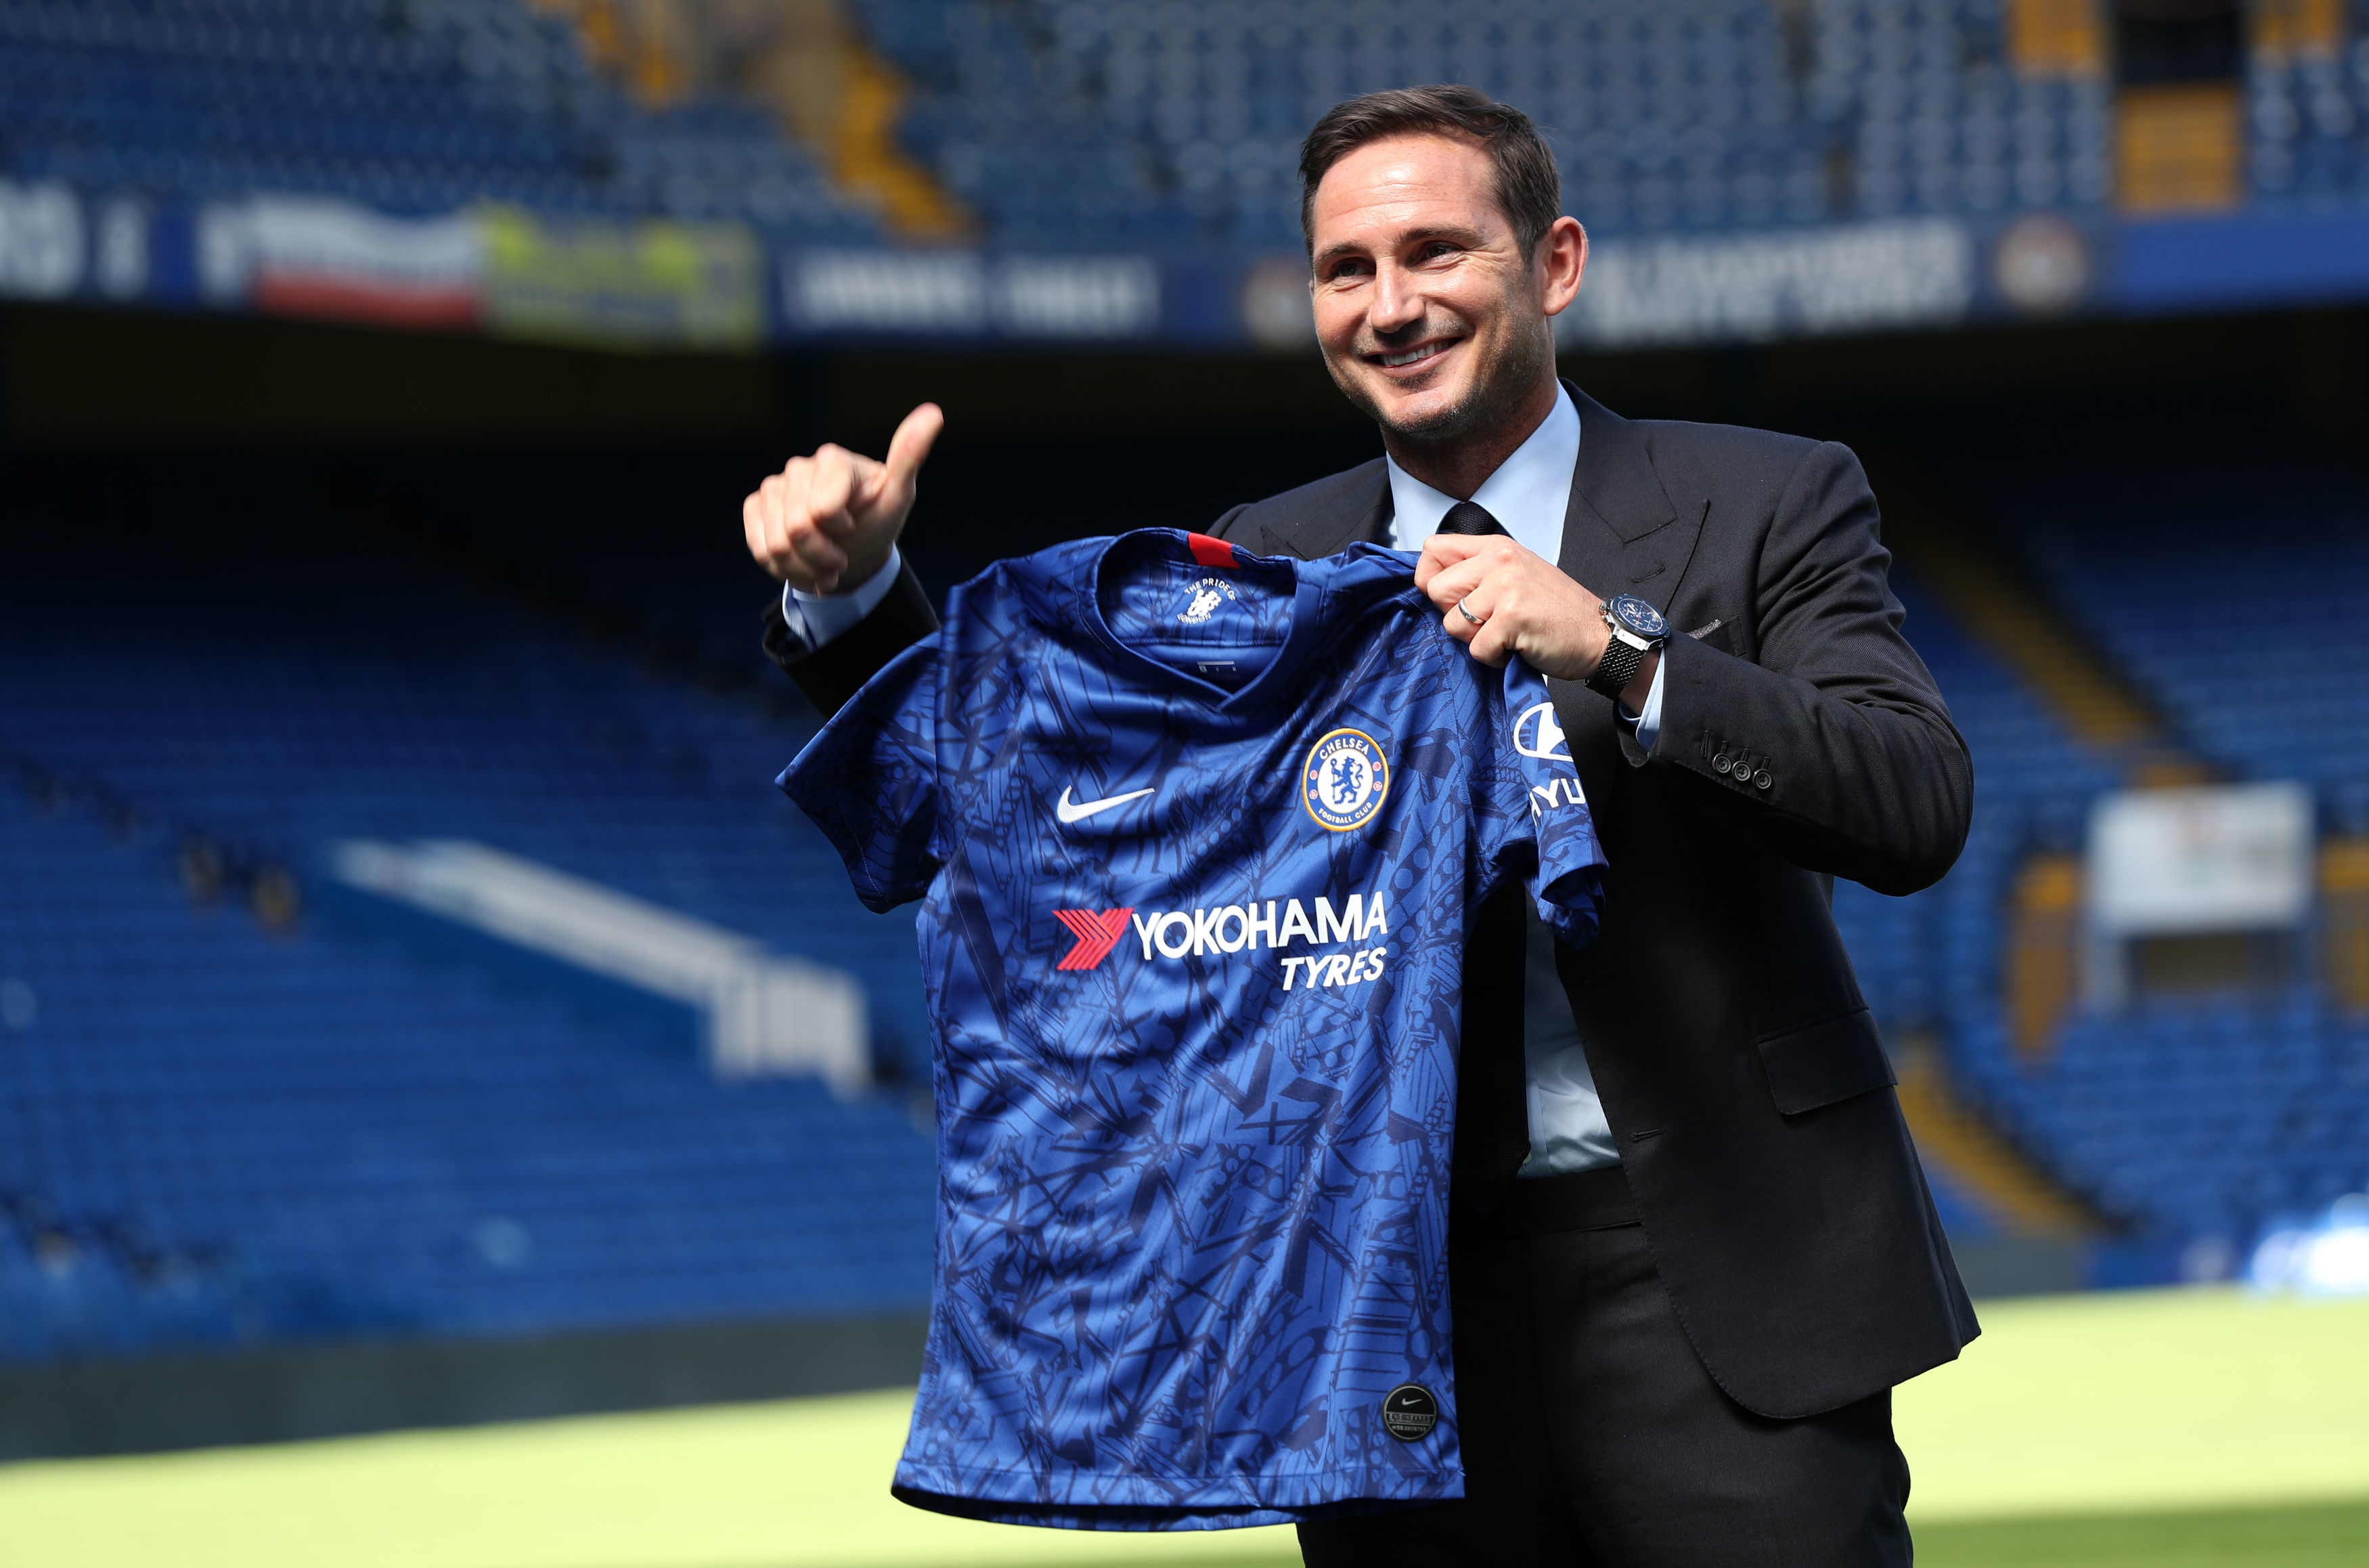 Chelsea's new manager Frank Lampard